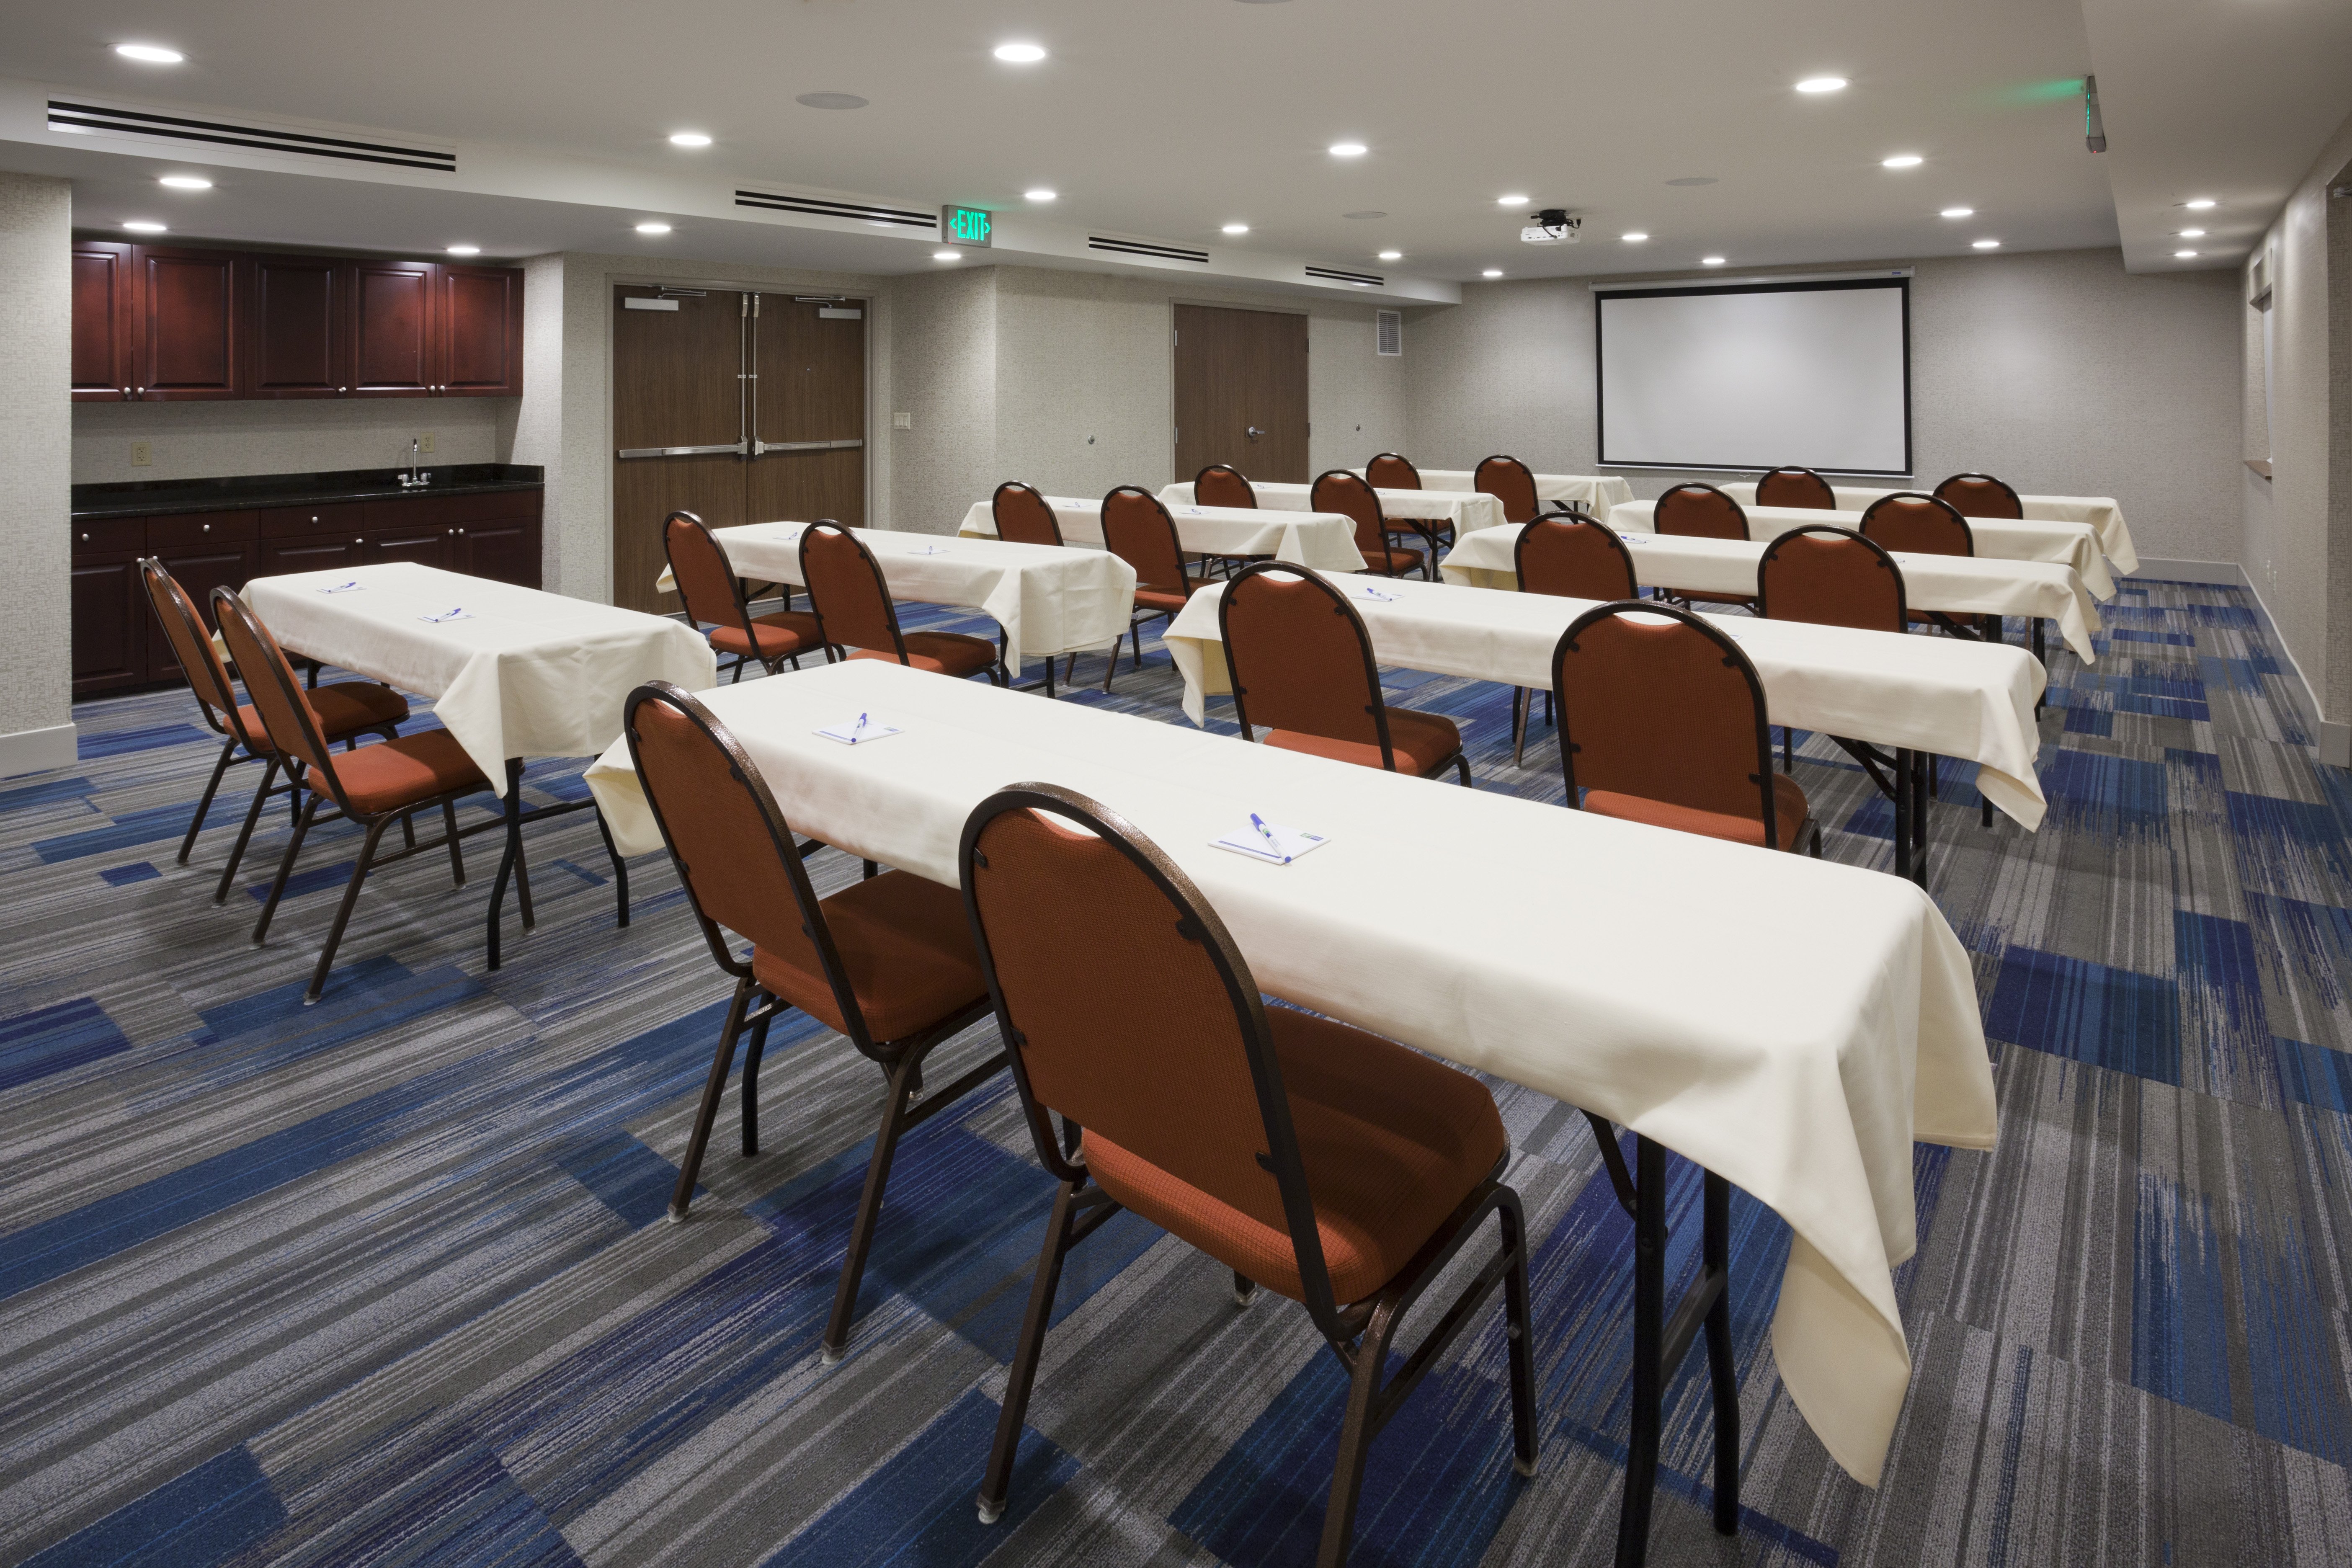 Host your next event in our meeting space, fits up to 50 people